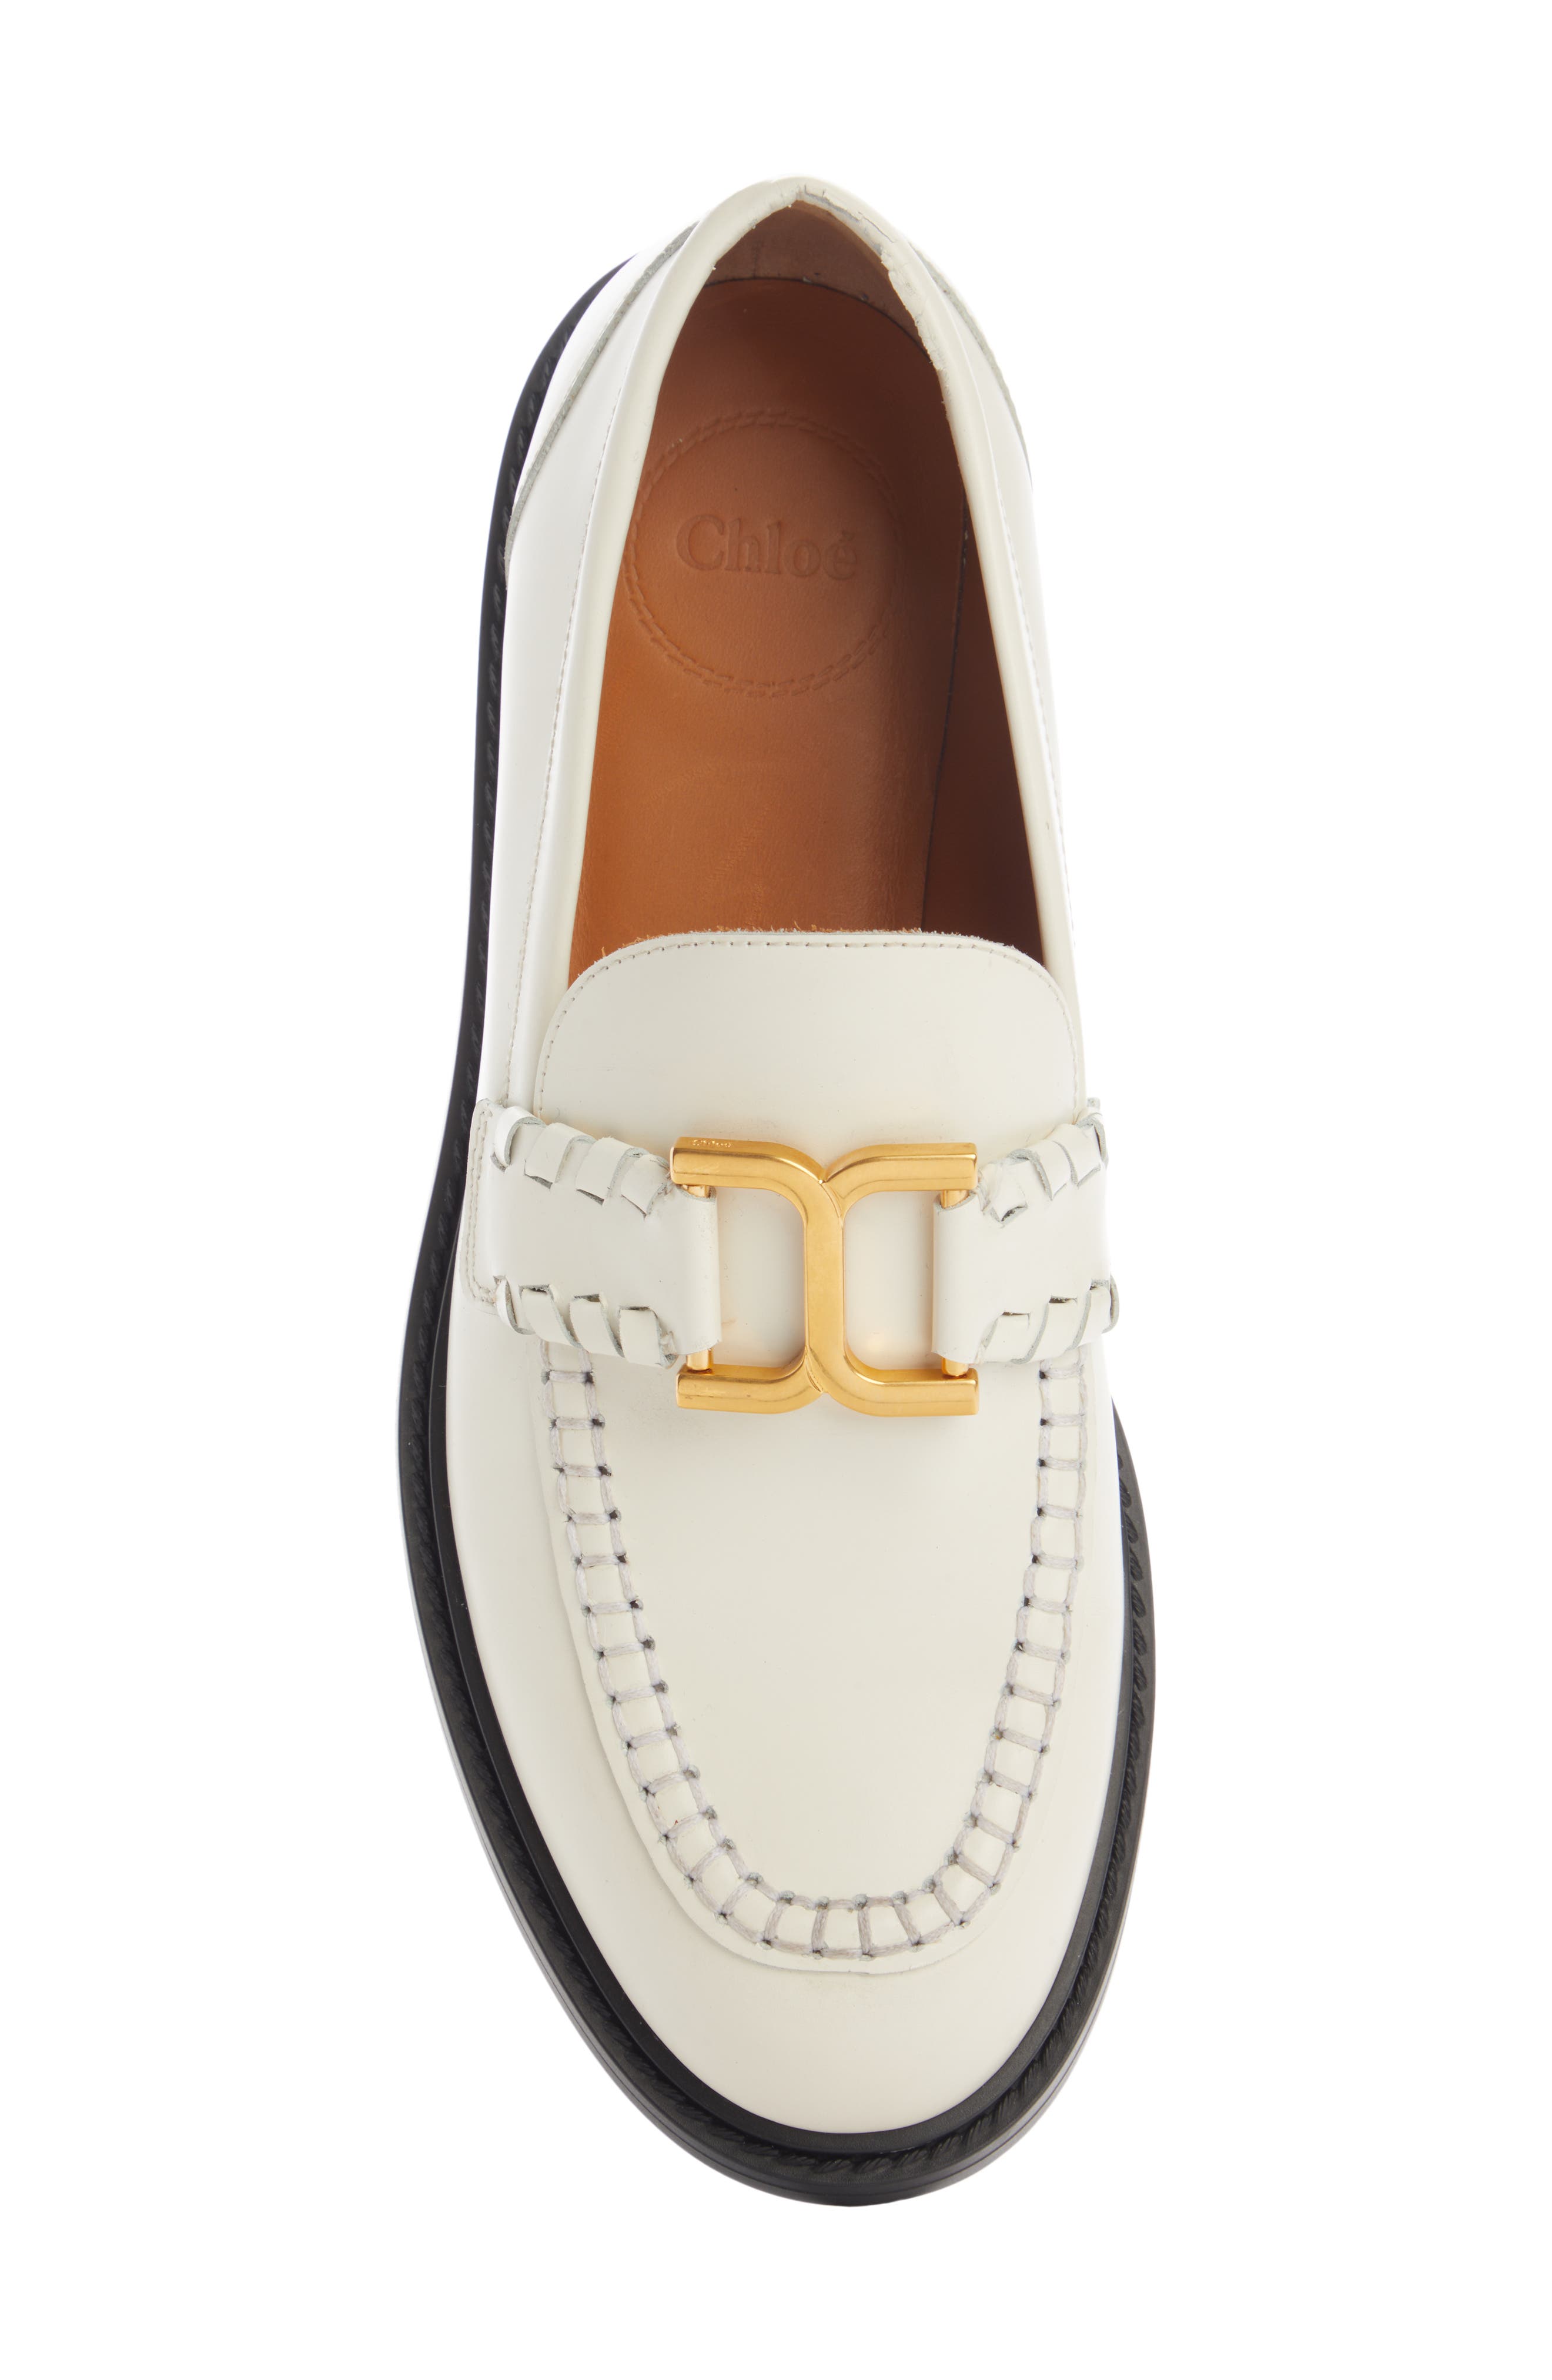 Marcie Leather Loafers in White - Chloe